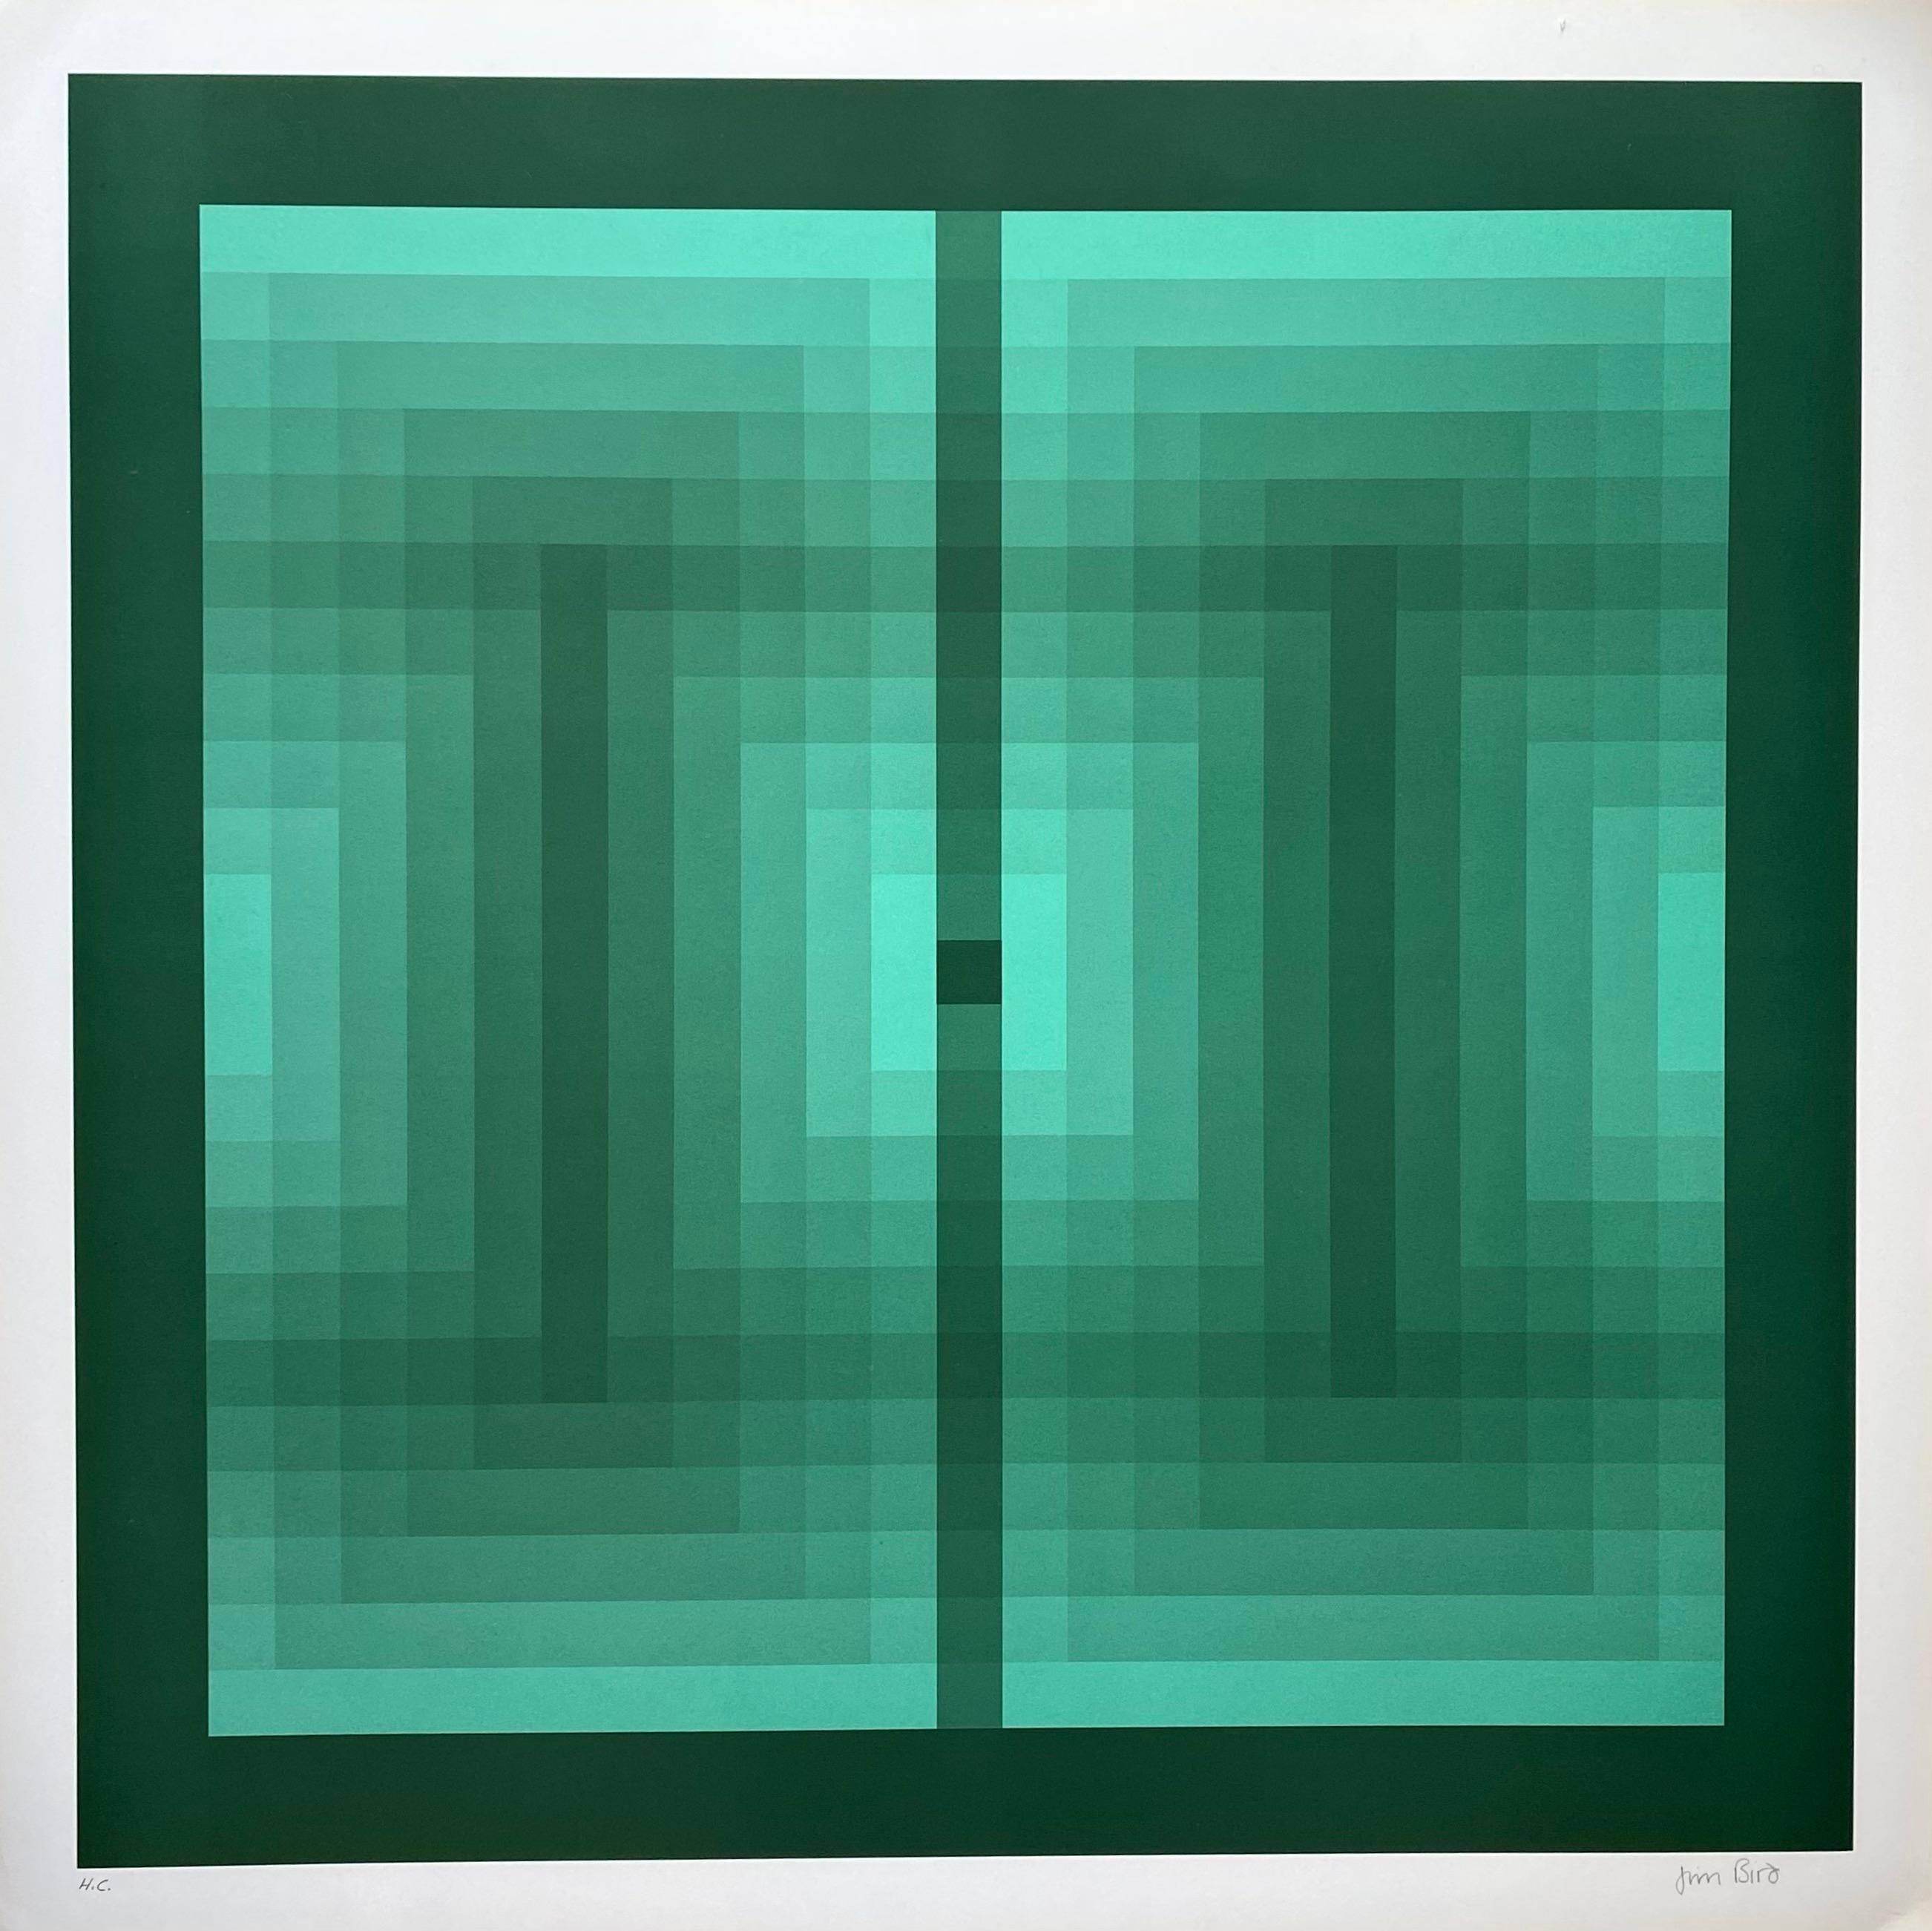 Jim Bird - tribute to Vasarely 
Photolithography
Circa 1970
Signed 
Paper size : 68 × 68
Image size : 61 × 61 
Perfect condition 
Published by Poligrafa, Barcelona.